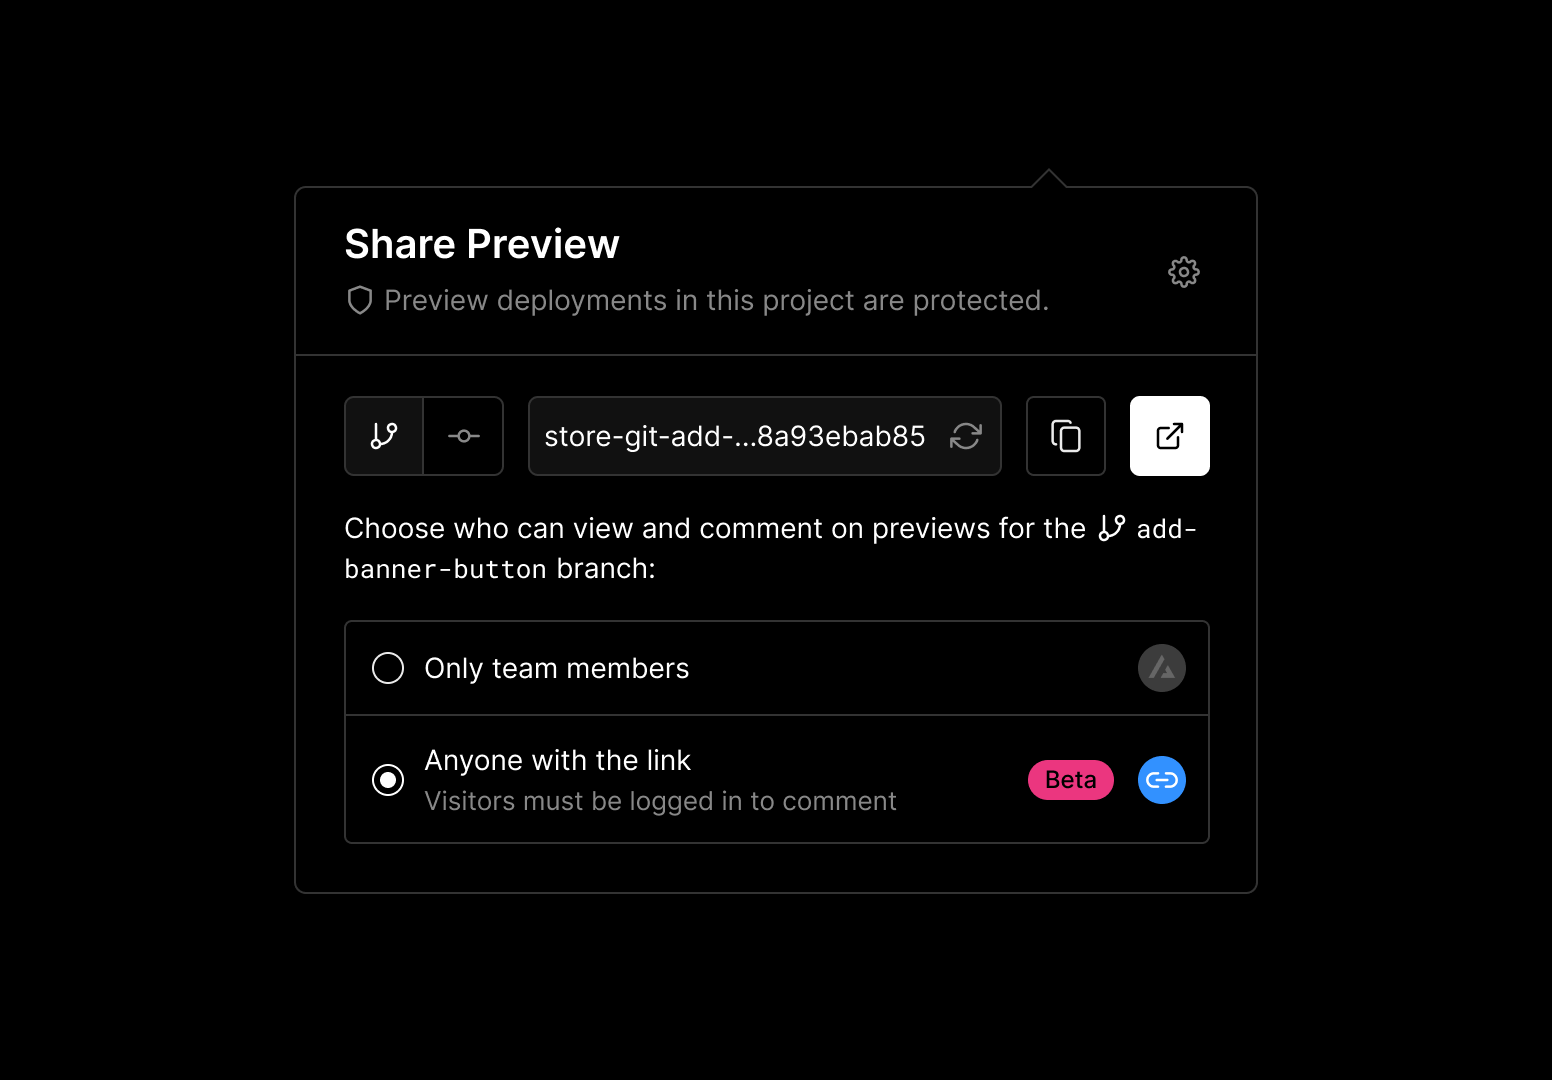 Share private preview deployments with people outside your team without the need to log in